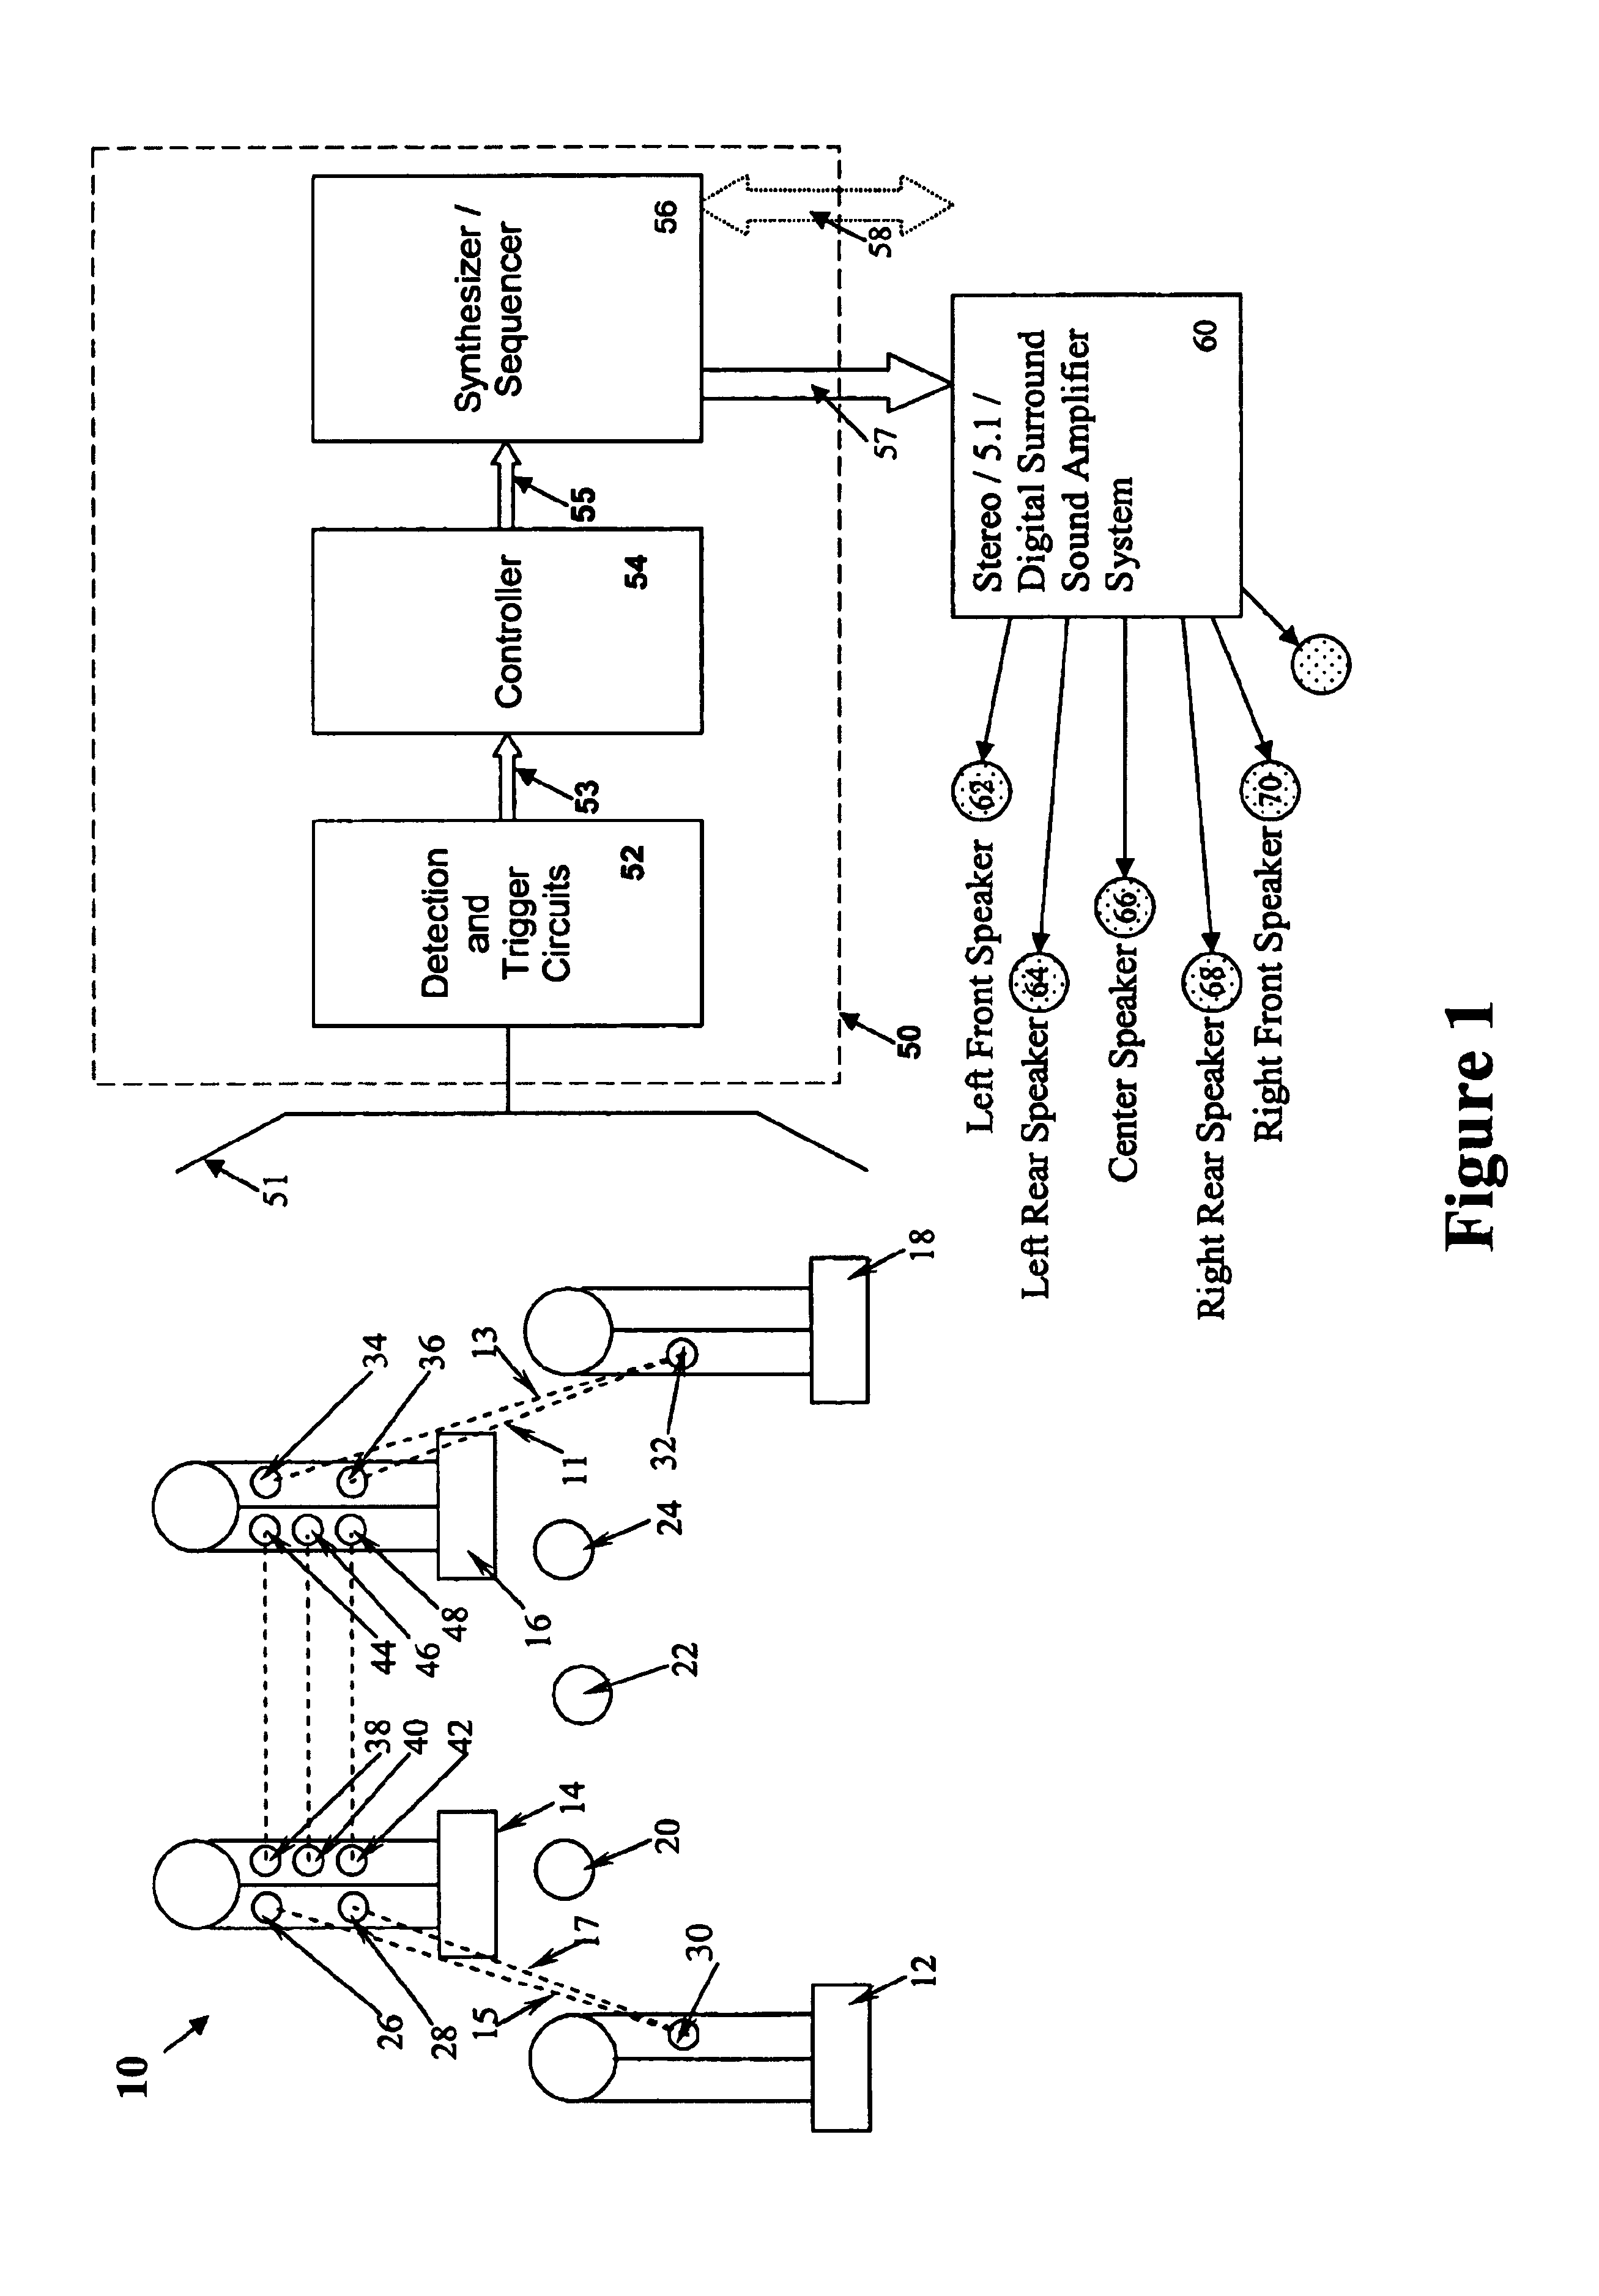 Music instrument system and methods